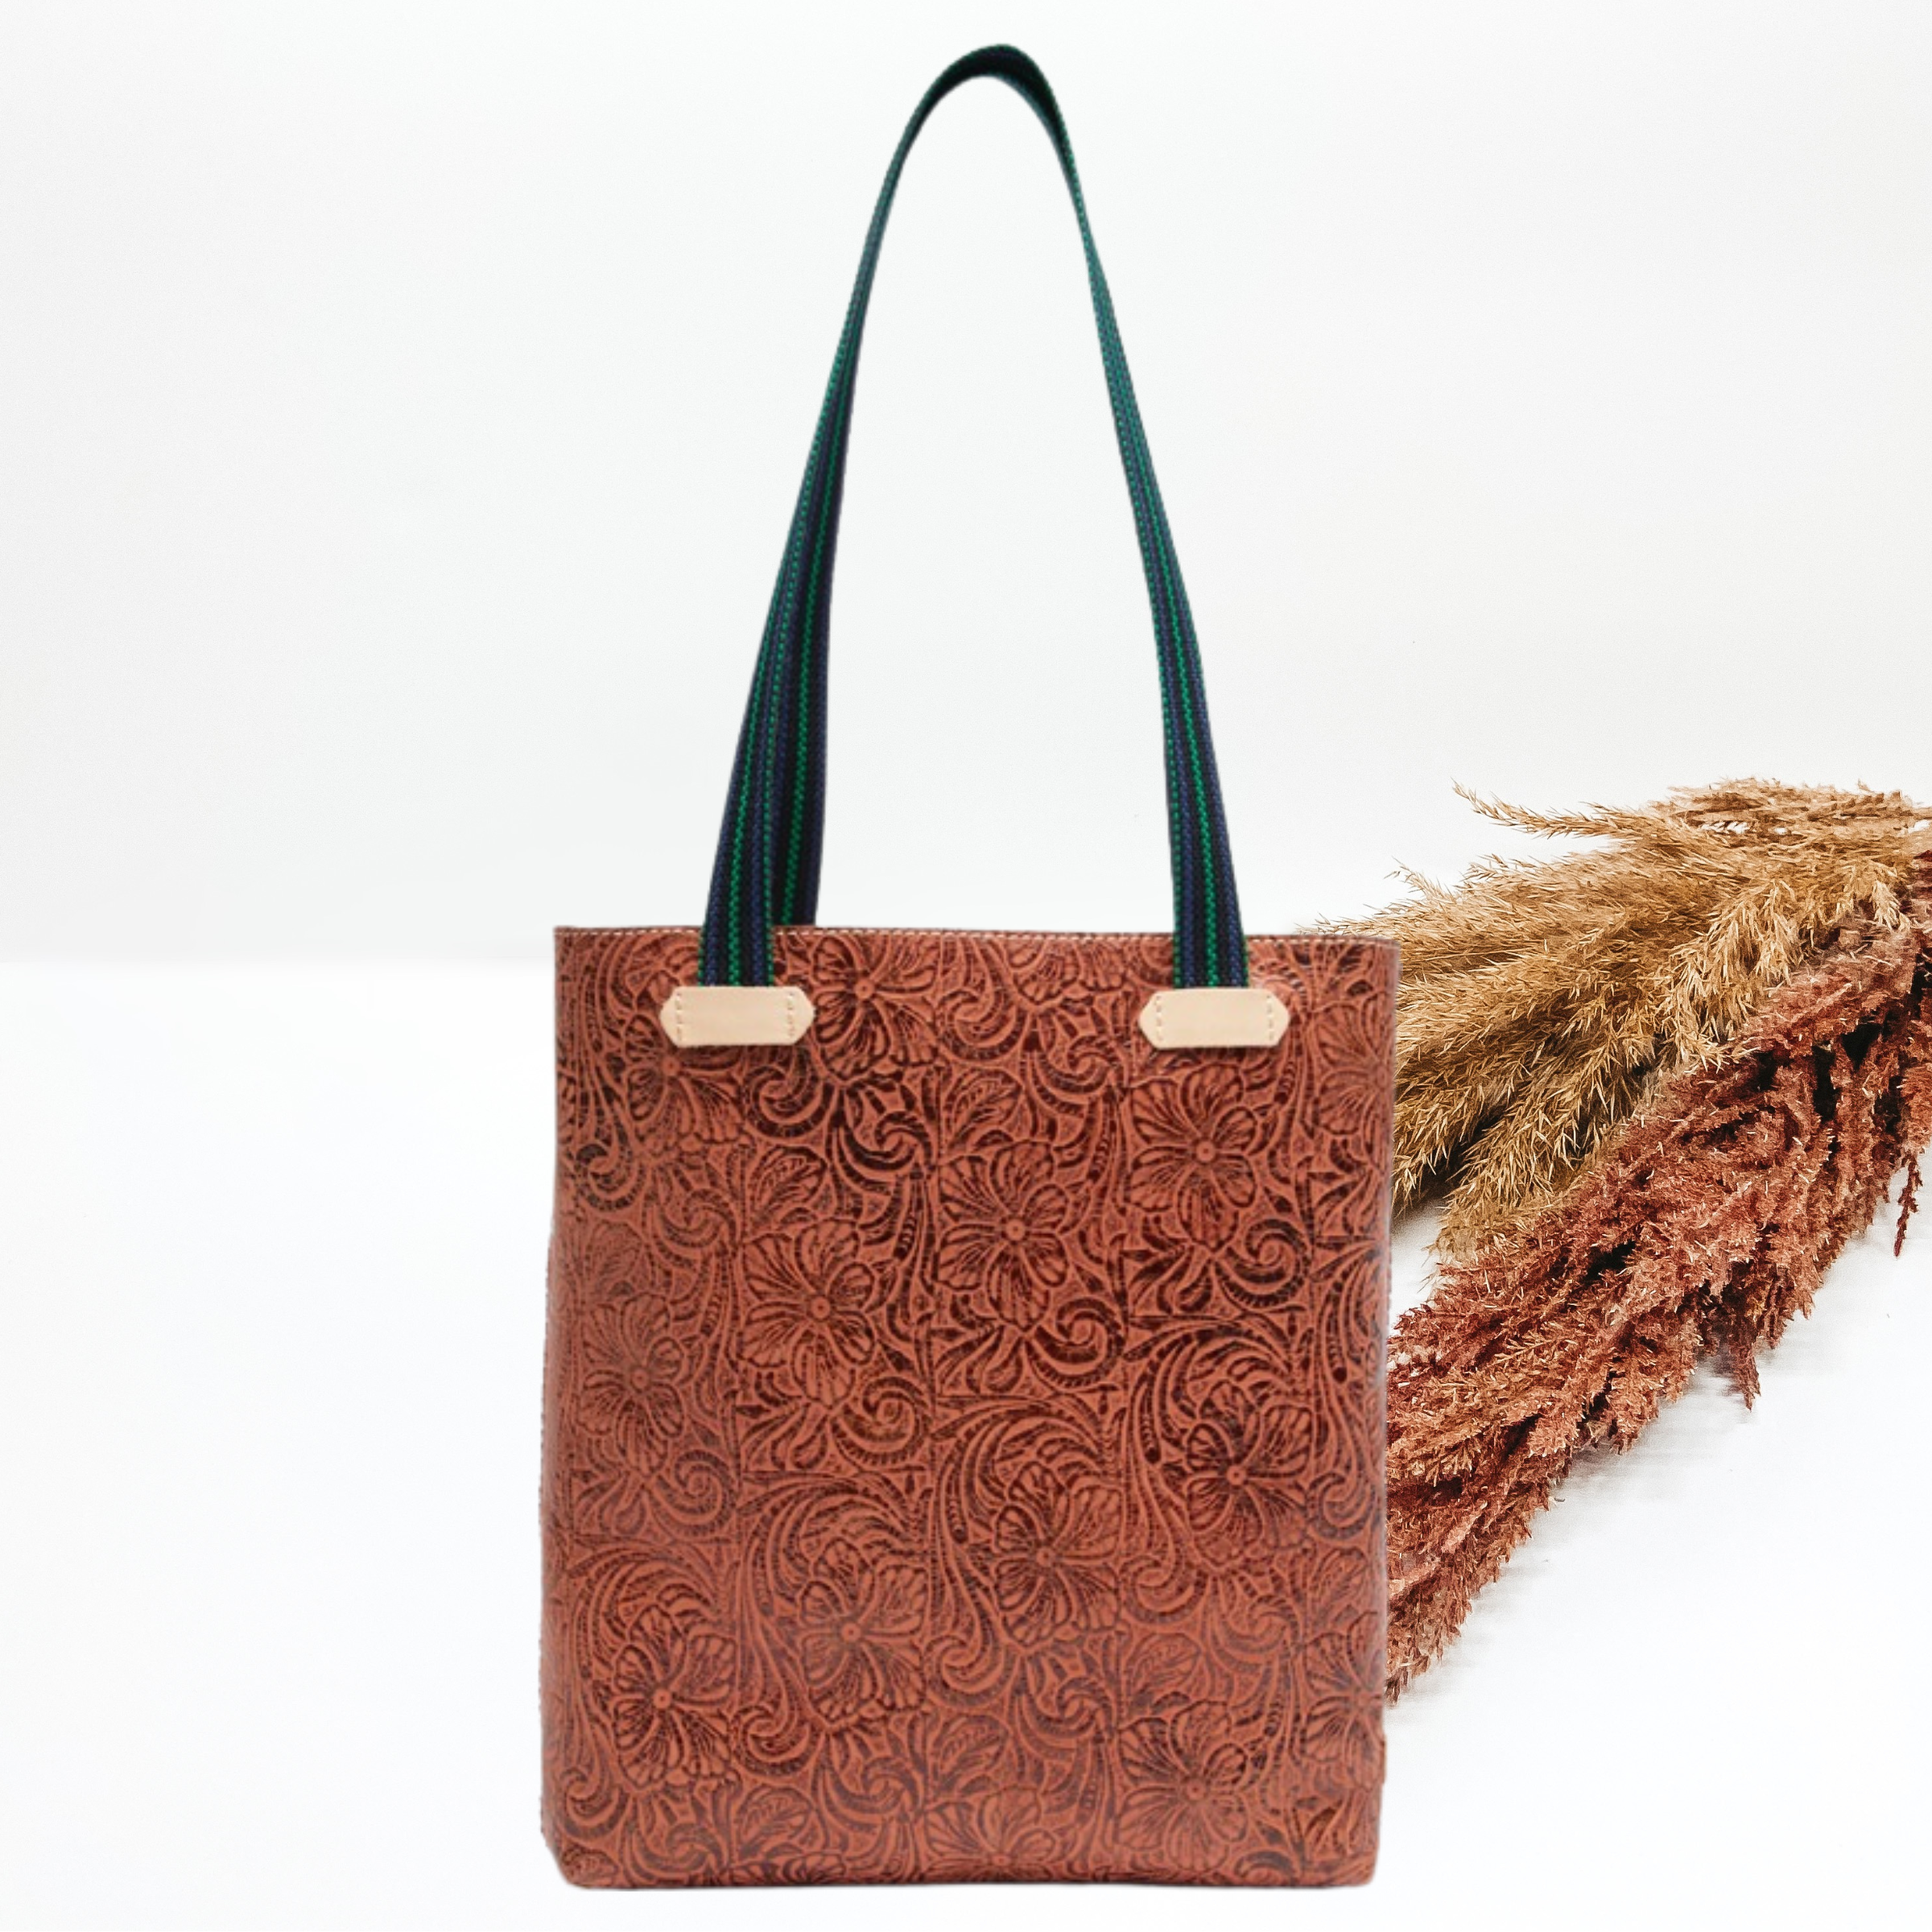 Pictured is long, rectangle tote that has a leather tooled all over print. This purse also includes striped purse straps. This purse is pictured on a white background with pompous grass on the right side of the picture.